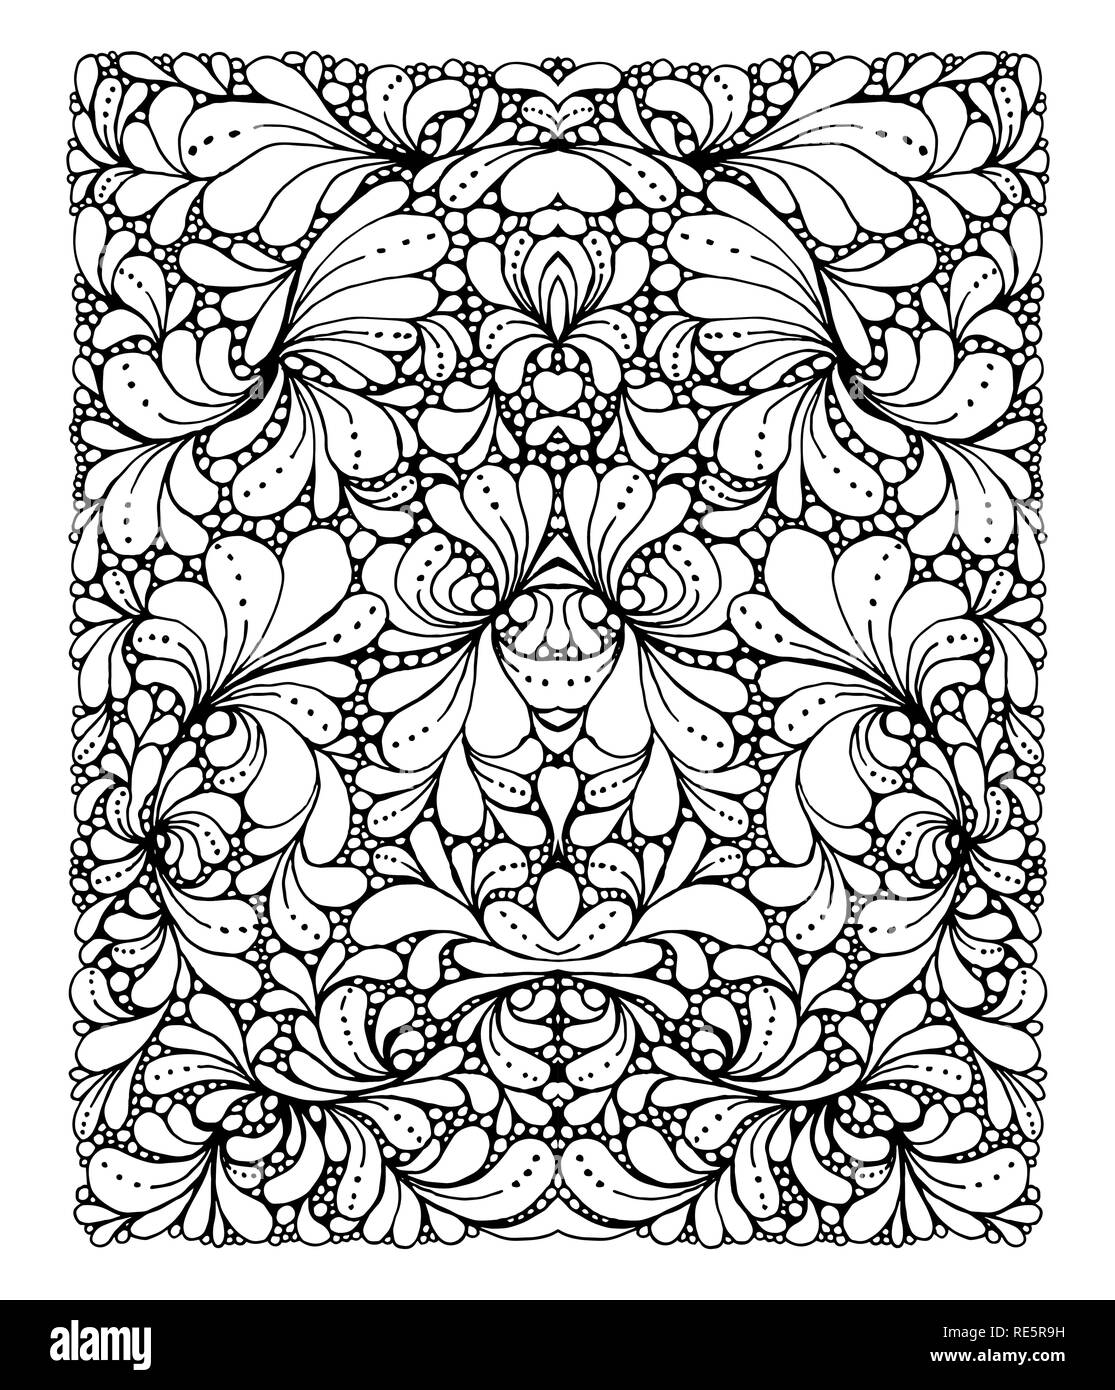 Coloring book page design with pattern. Symmetric ethnic ornament. Isolated vector illustration in doodle style. Headwear or neckwear design. Stock Vector